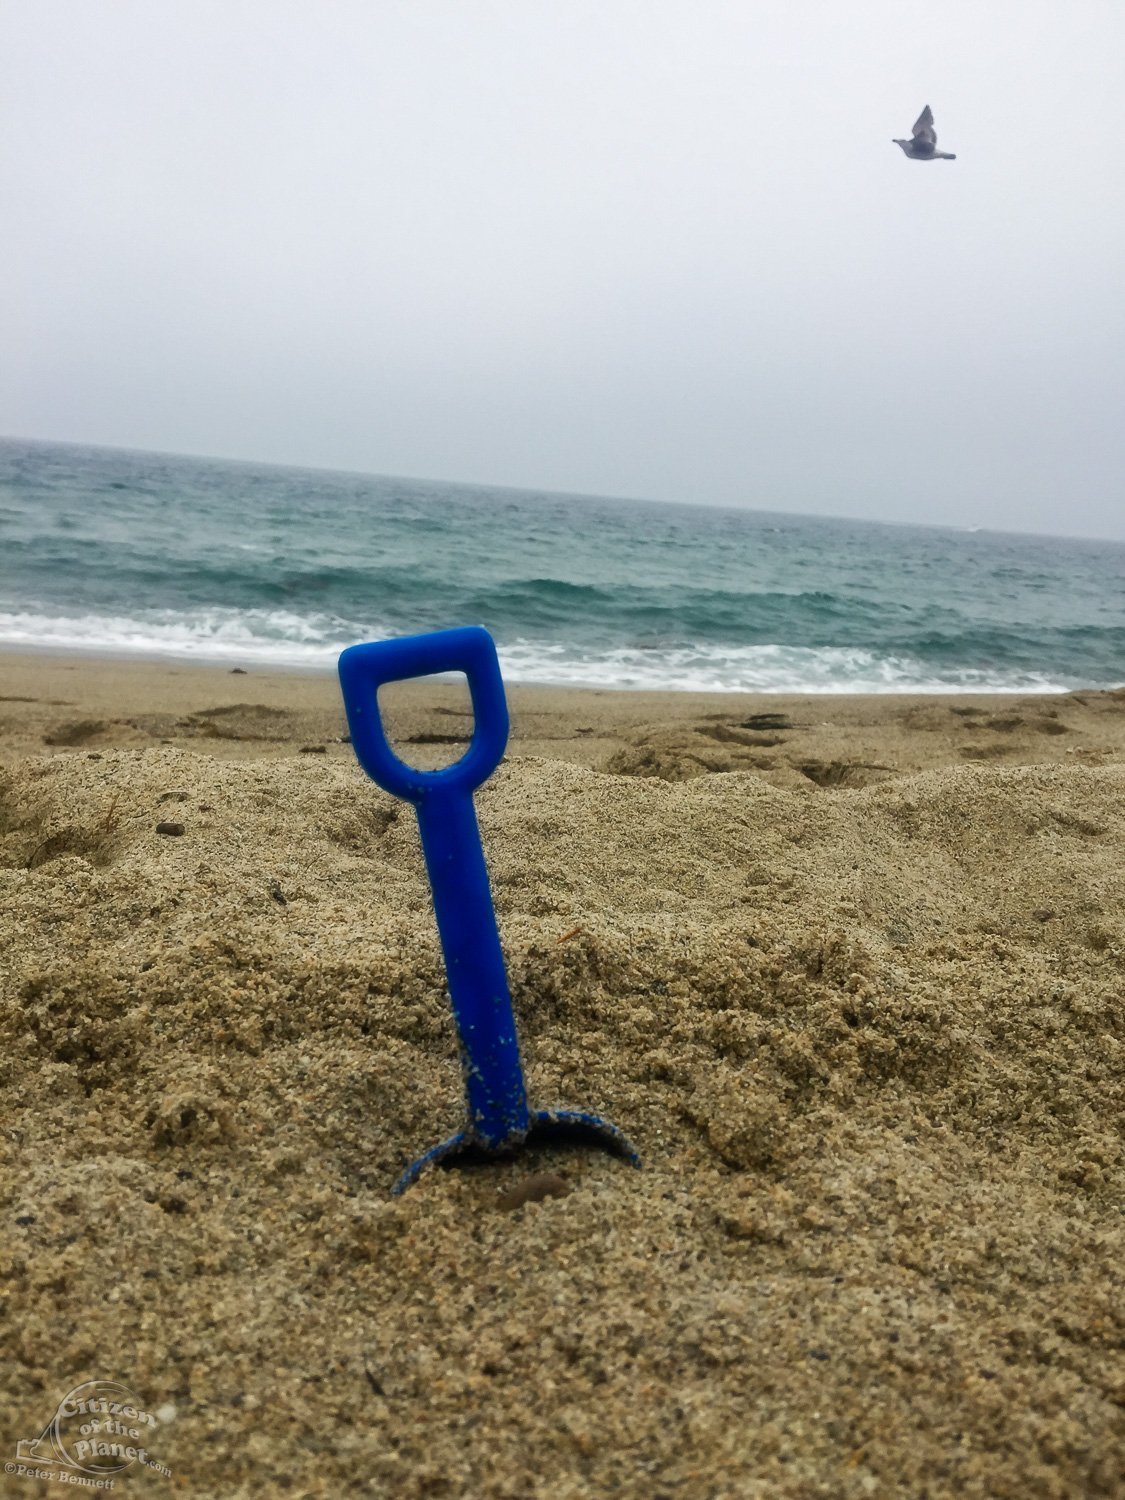 Shovel Handle with Seagull